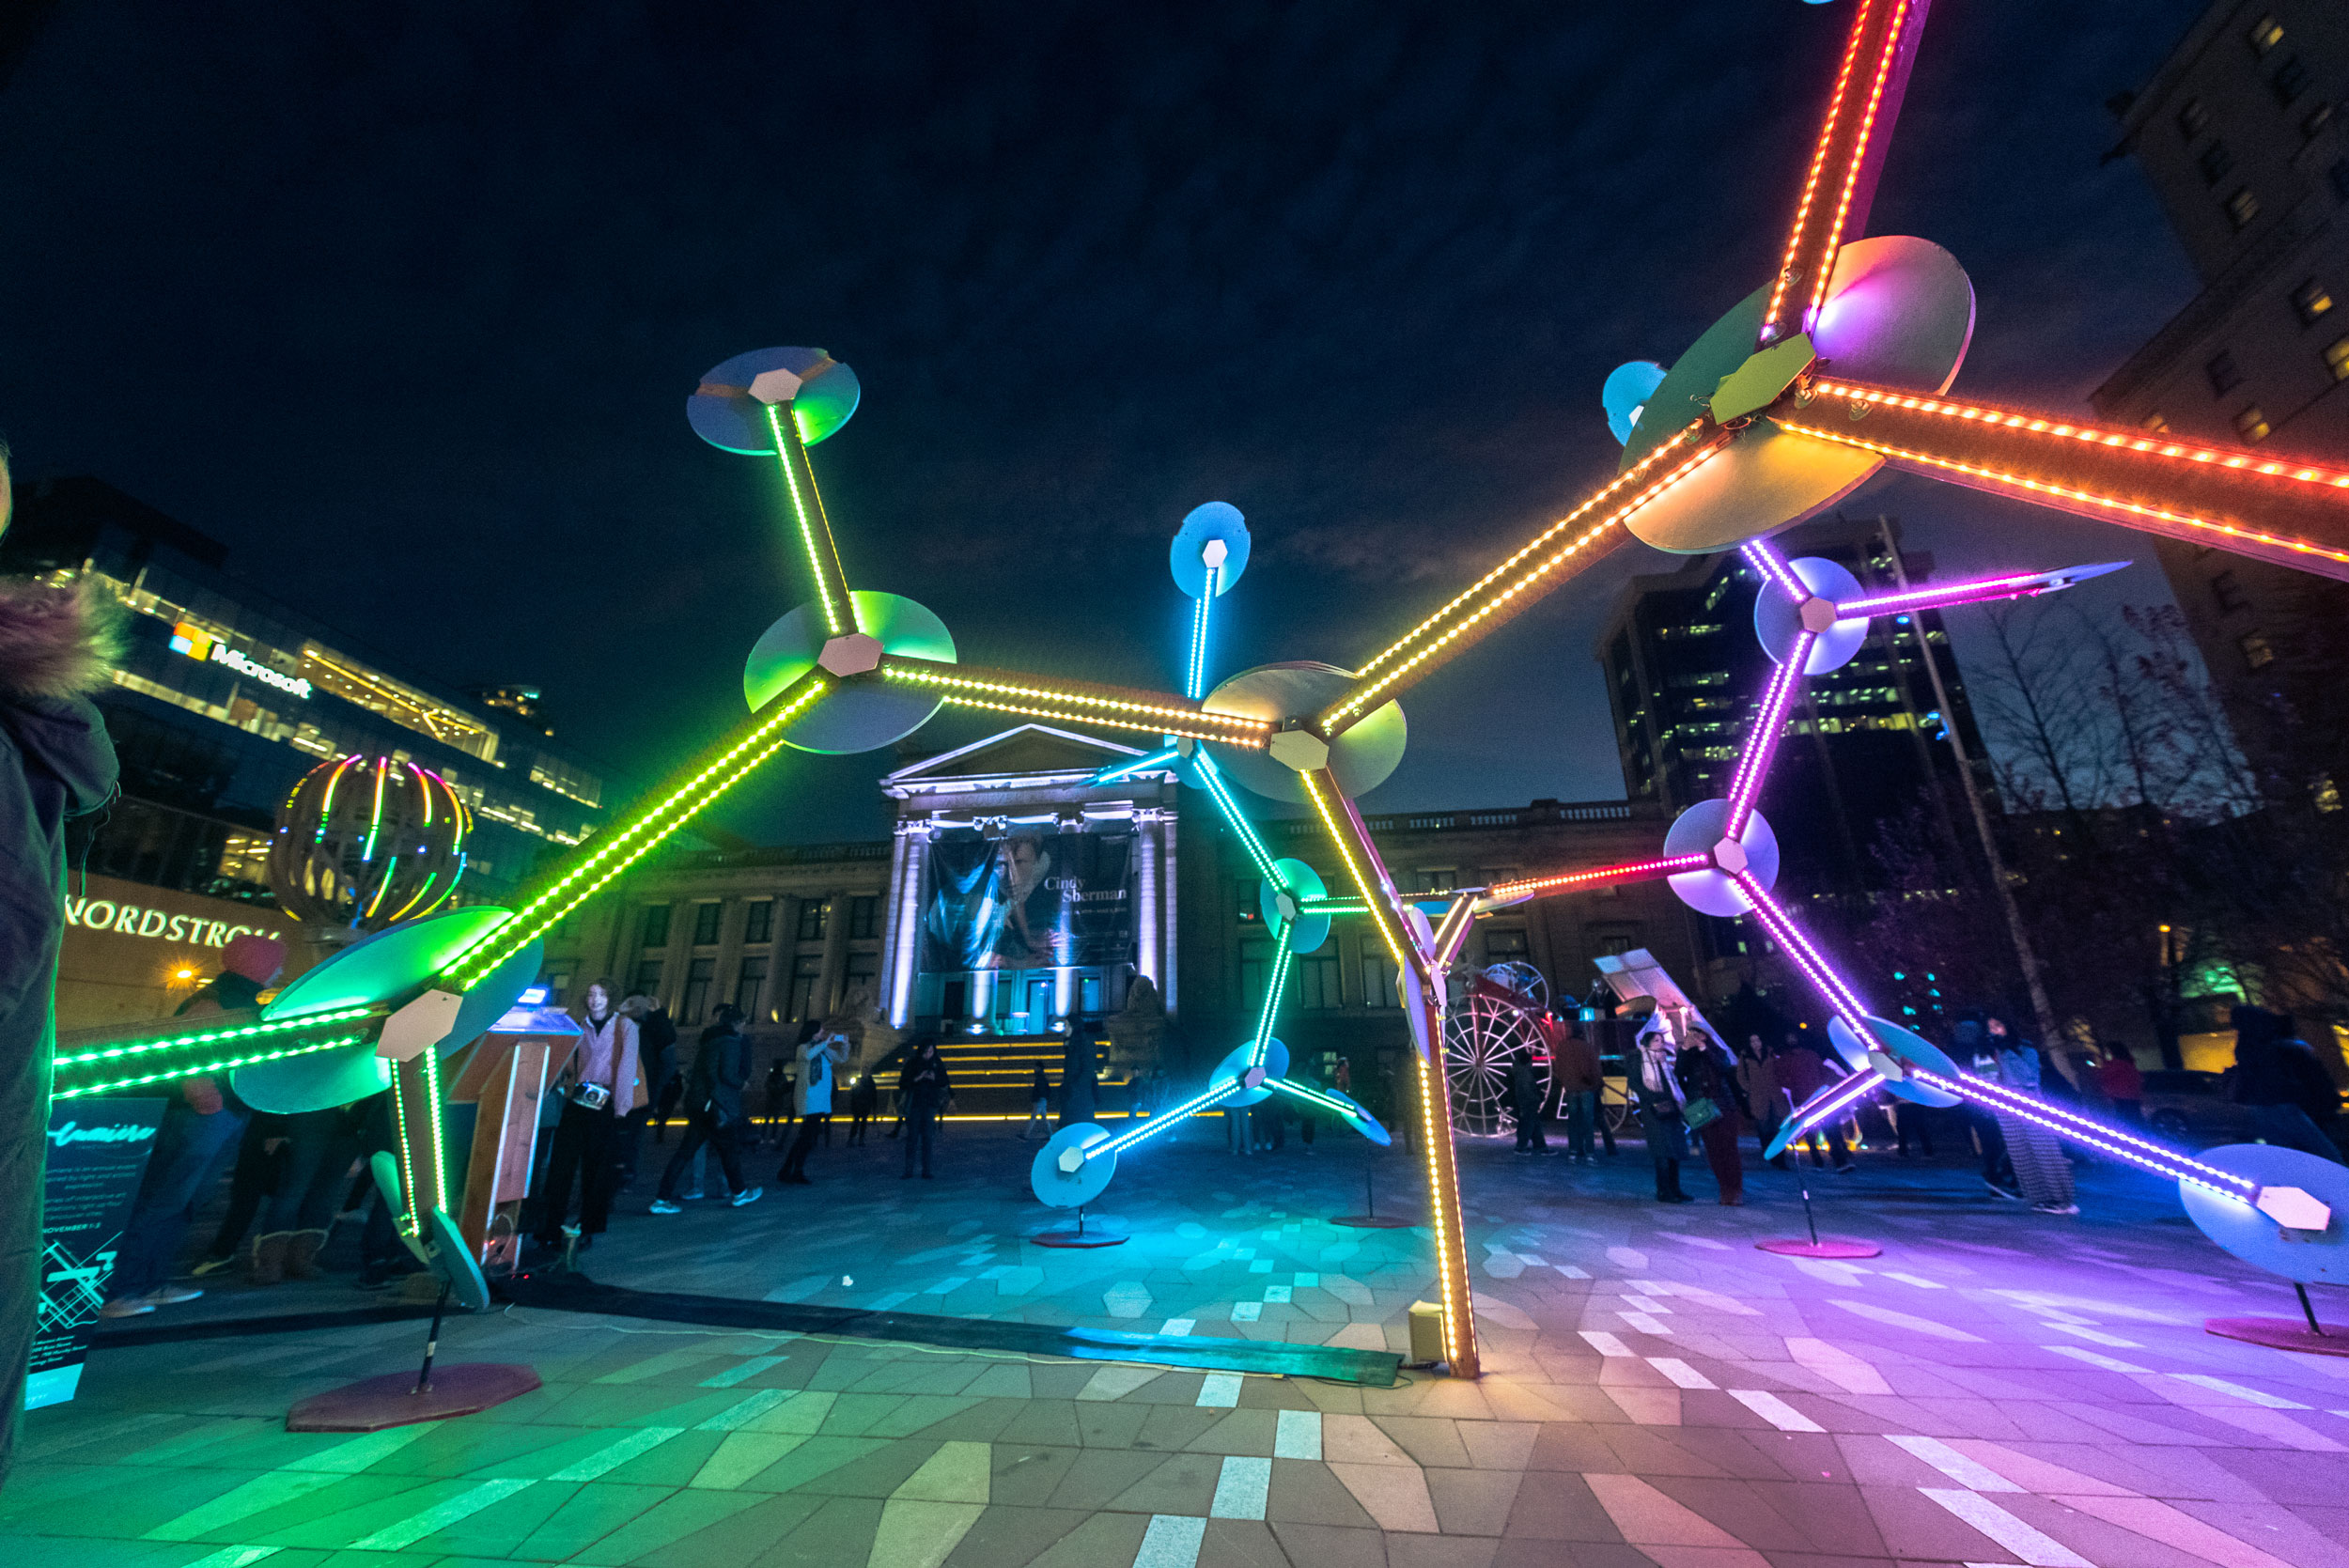 Lumiere YVR - Lumiere returns to Vancouver November 2nd!